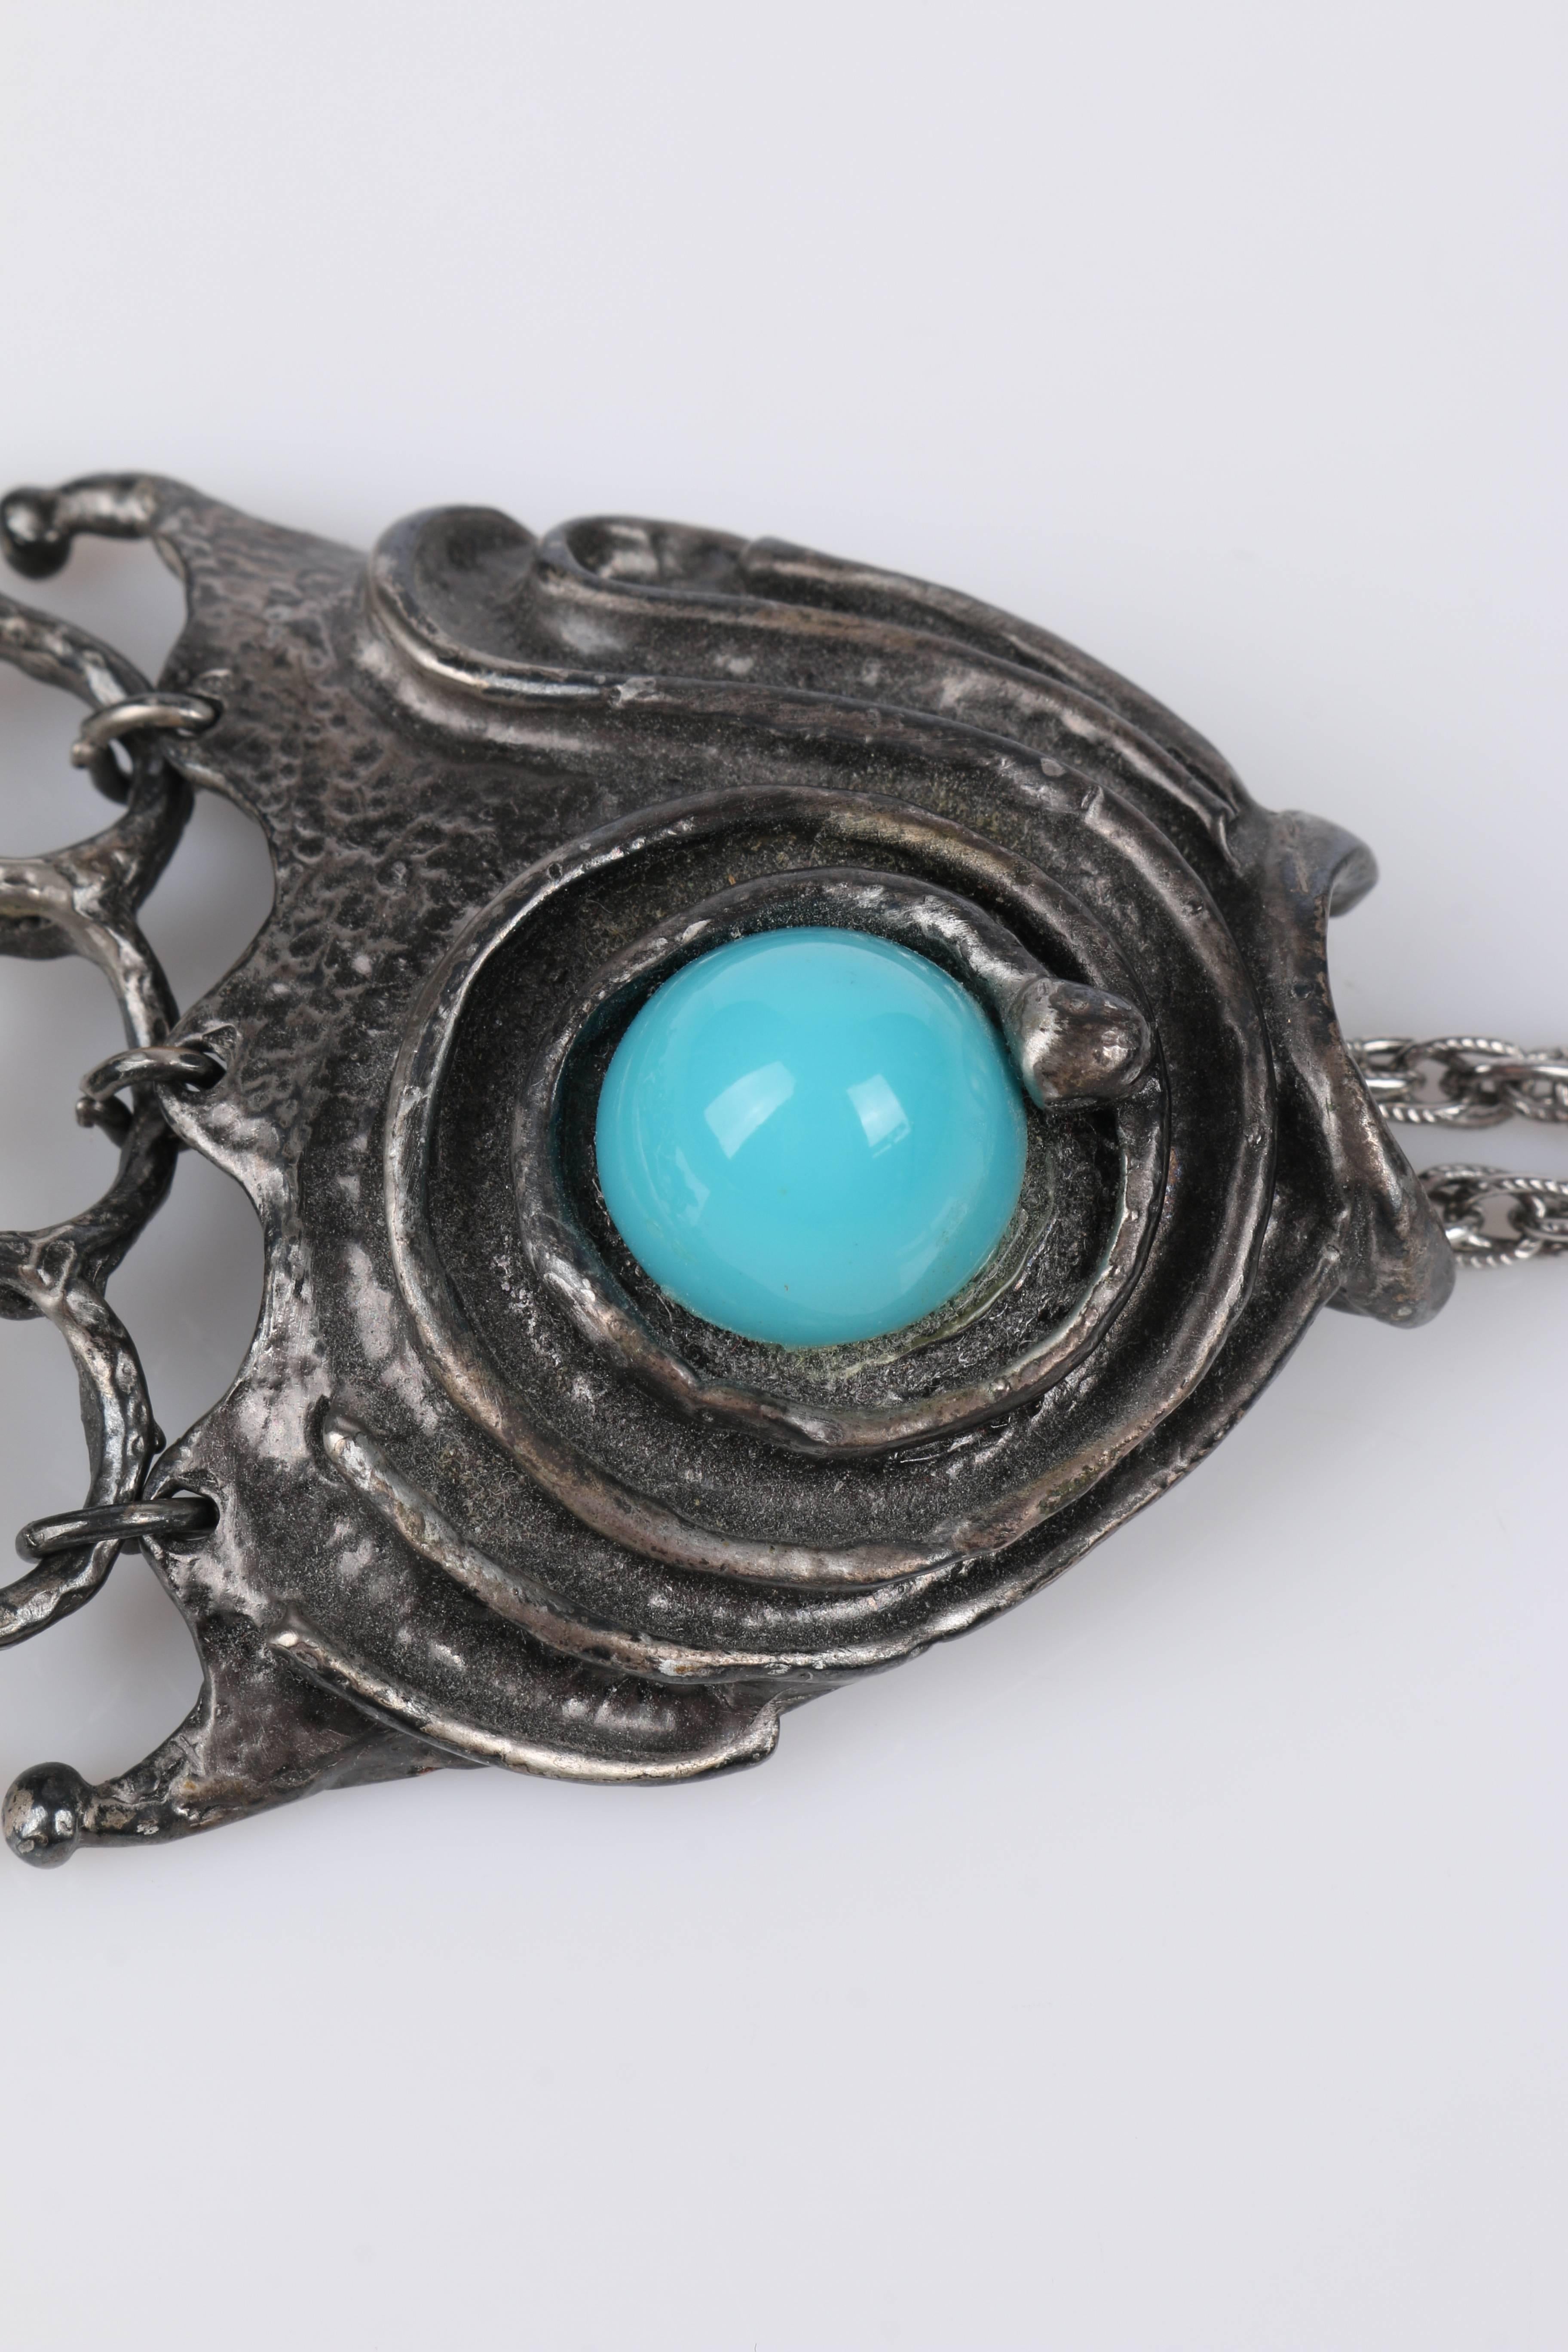 ERWIN PEARL c.1970's Large Silver Turquoise Fish Signed Pendant Chain Necklace 5